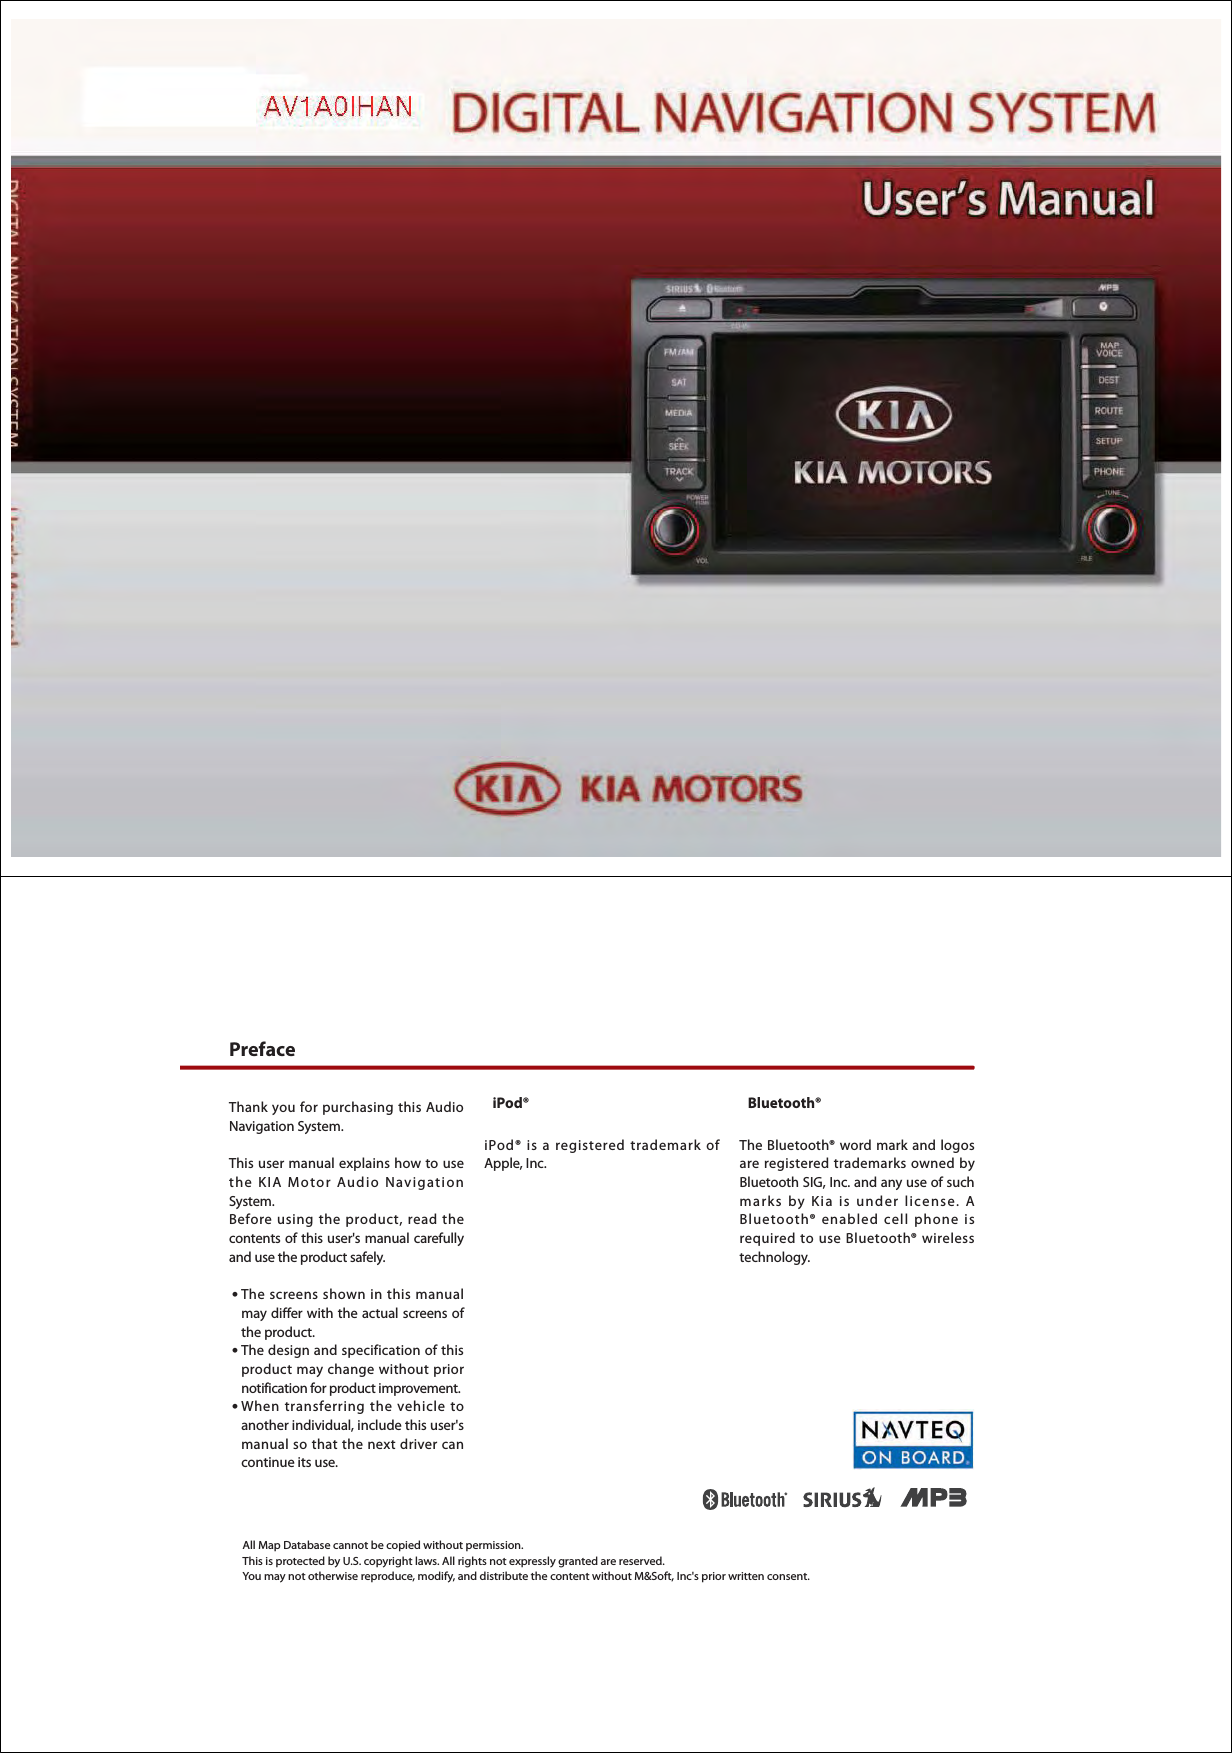 Thank you for purchasing this Audio Navigation System. This user manual explains how to use the KIA Motor Audio Navigation System. Before using the product, read the contents of this user&apos;s manual carefully and use the product safely. ● The screens shown in this manual may differ with the actual screens of the product.● The design and specification of this product may change without prior notification for product improvement.  ● When transferring the vehicle to another individual, include this user&apos;s manual so that the next driver can continue its use. iPod®iPod® is a registered trademark of Apple, Inc.Bluetooth®The Bluetooth® word mark and logos are registered trademarks owned by Bluetooth SIG, Inc. and any use of such marks by Kia is under license. A Bluetooth® enabled cell phone is required to use Bluetooth® wireless technology.All Map Database cannot be copied without permission.This is protected by U.S. copyright laws. All rights not expressly granted are reserved. You may not otherwise reproduce, modify, and distribute the content without M&amp;Soft, Inc&apos;s prior written consent.Preface 